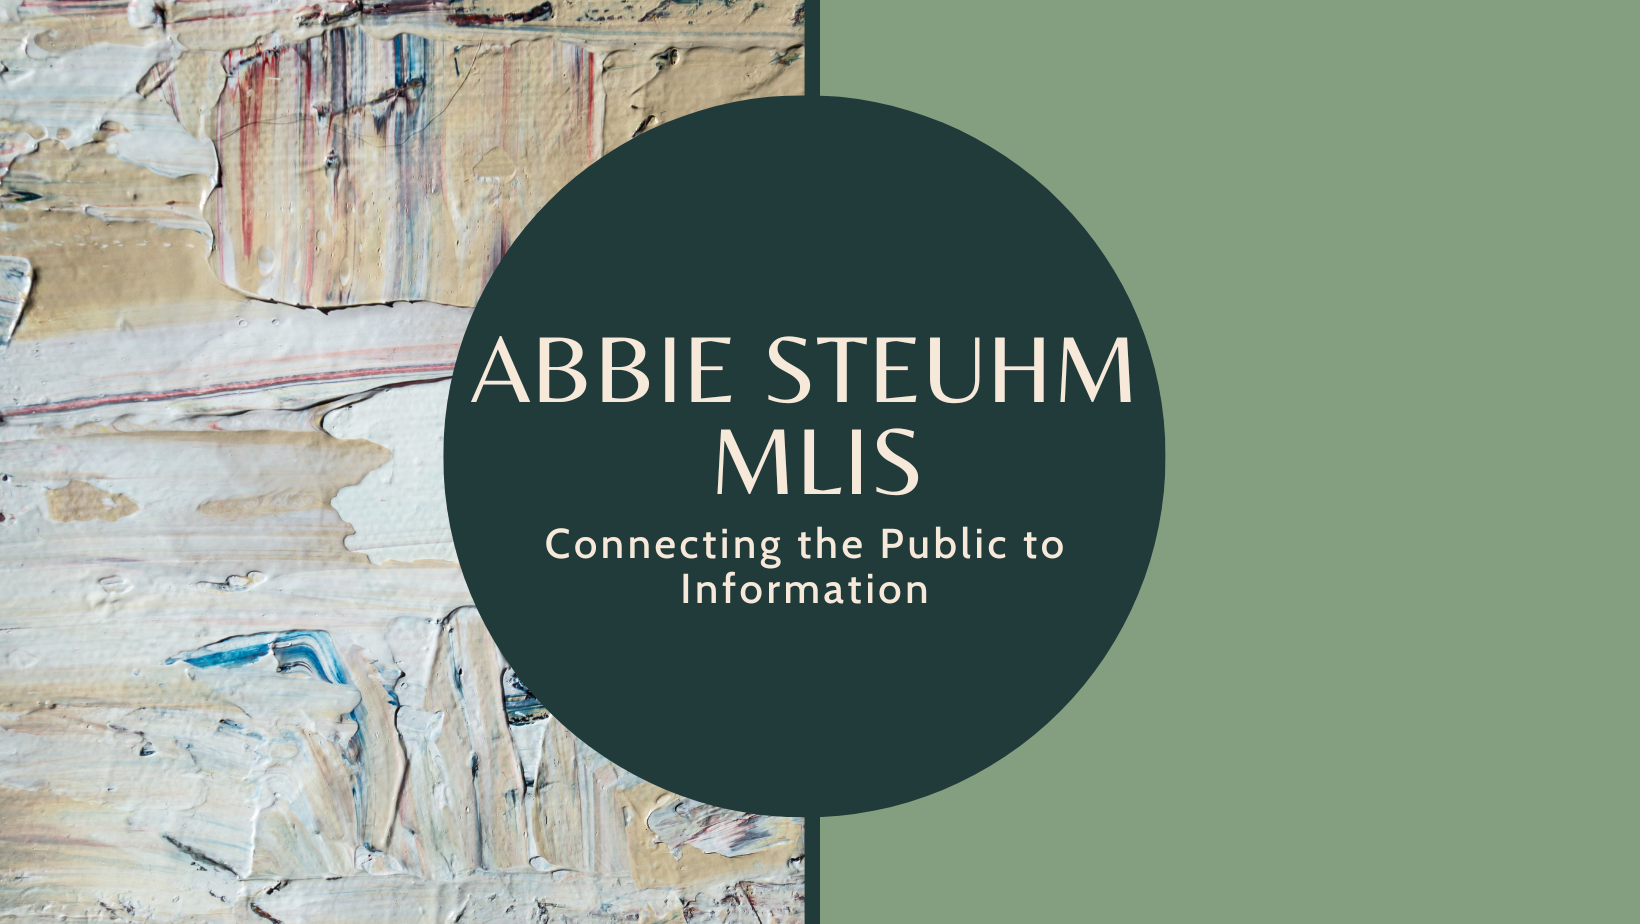 A dark green circle on top of a painted background. The words Abbie Steuhm, Connecting the Public to information are printed on the circle.